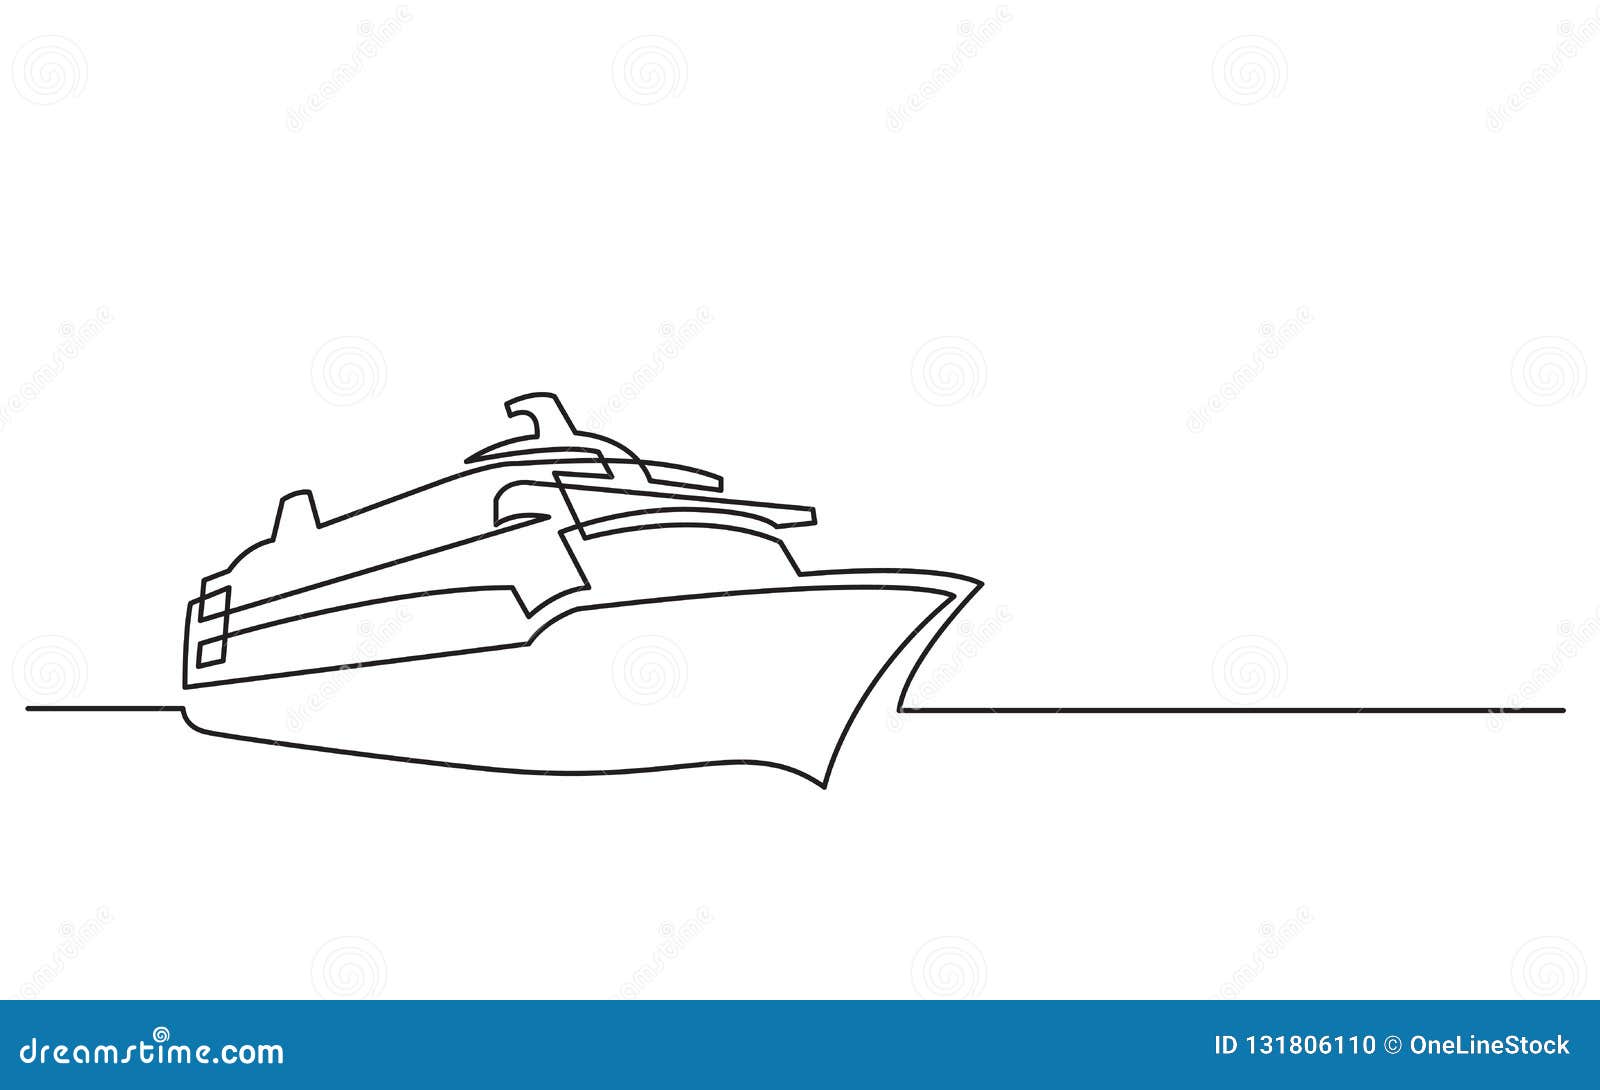 line drawing of cruise ship